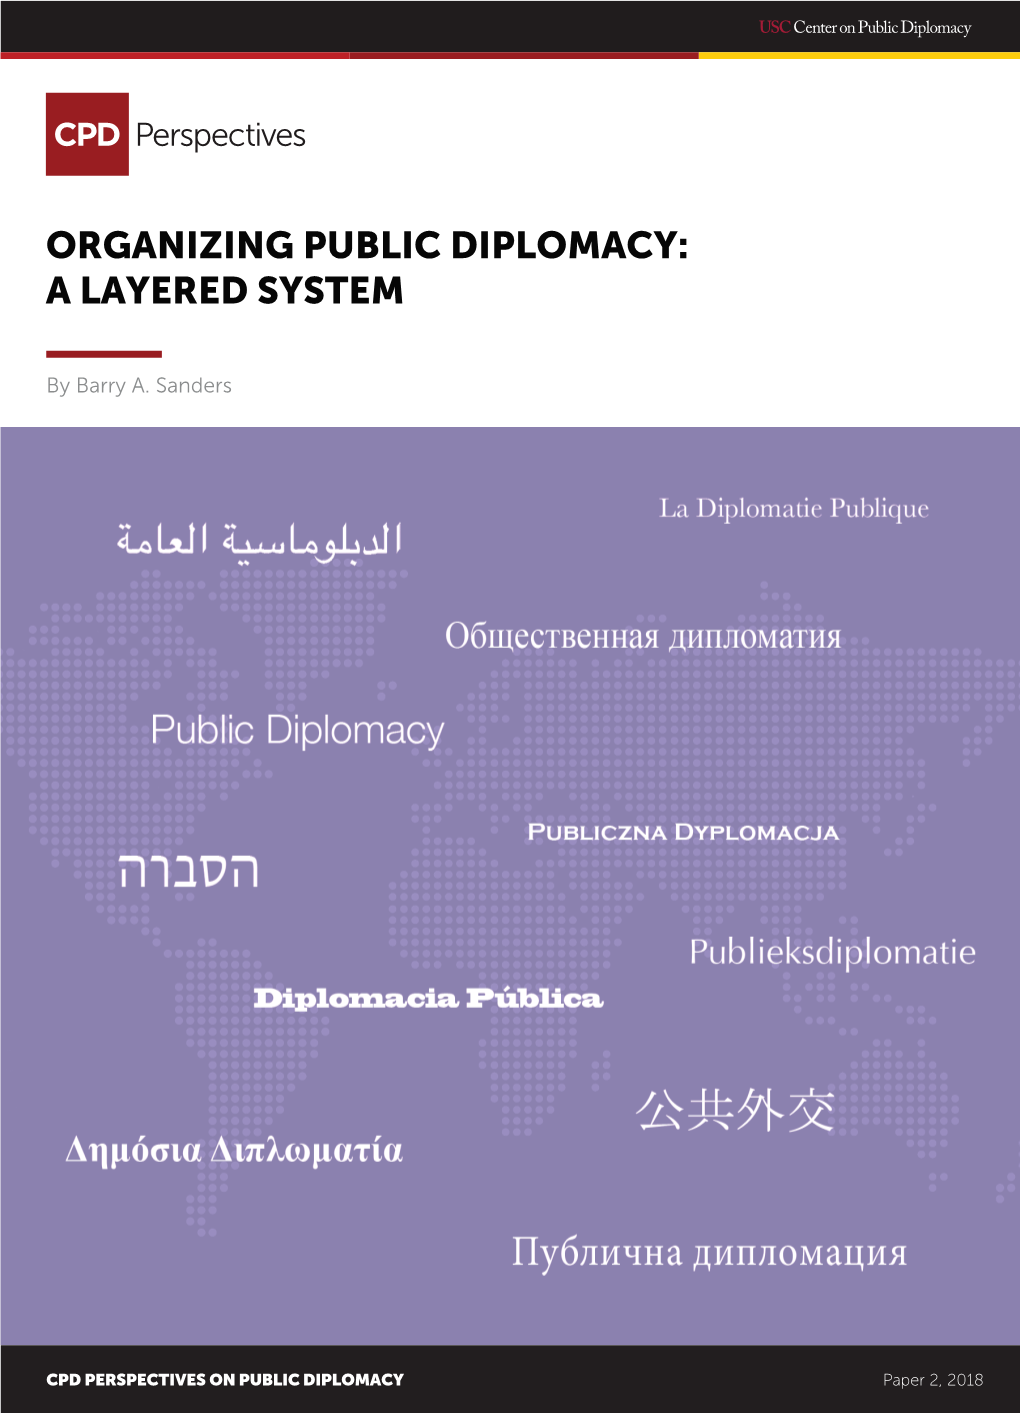 Organizing Public Diplomacy: a Layered System